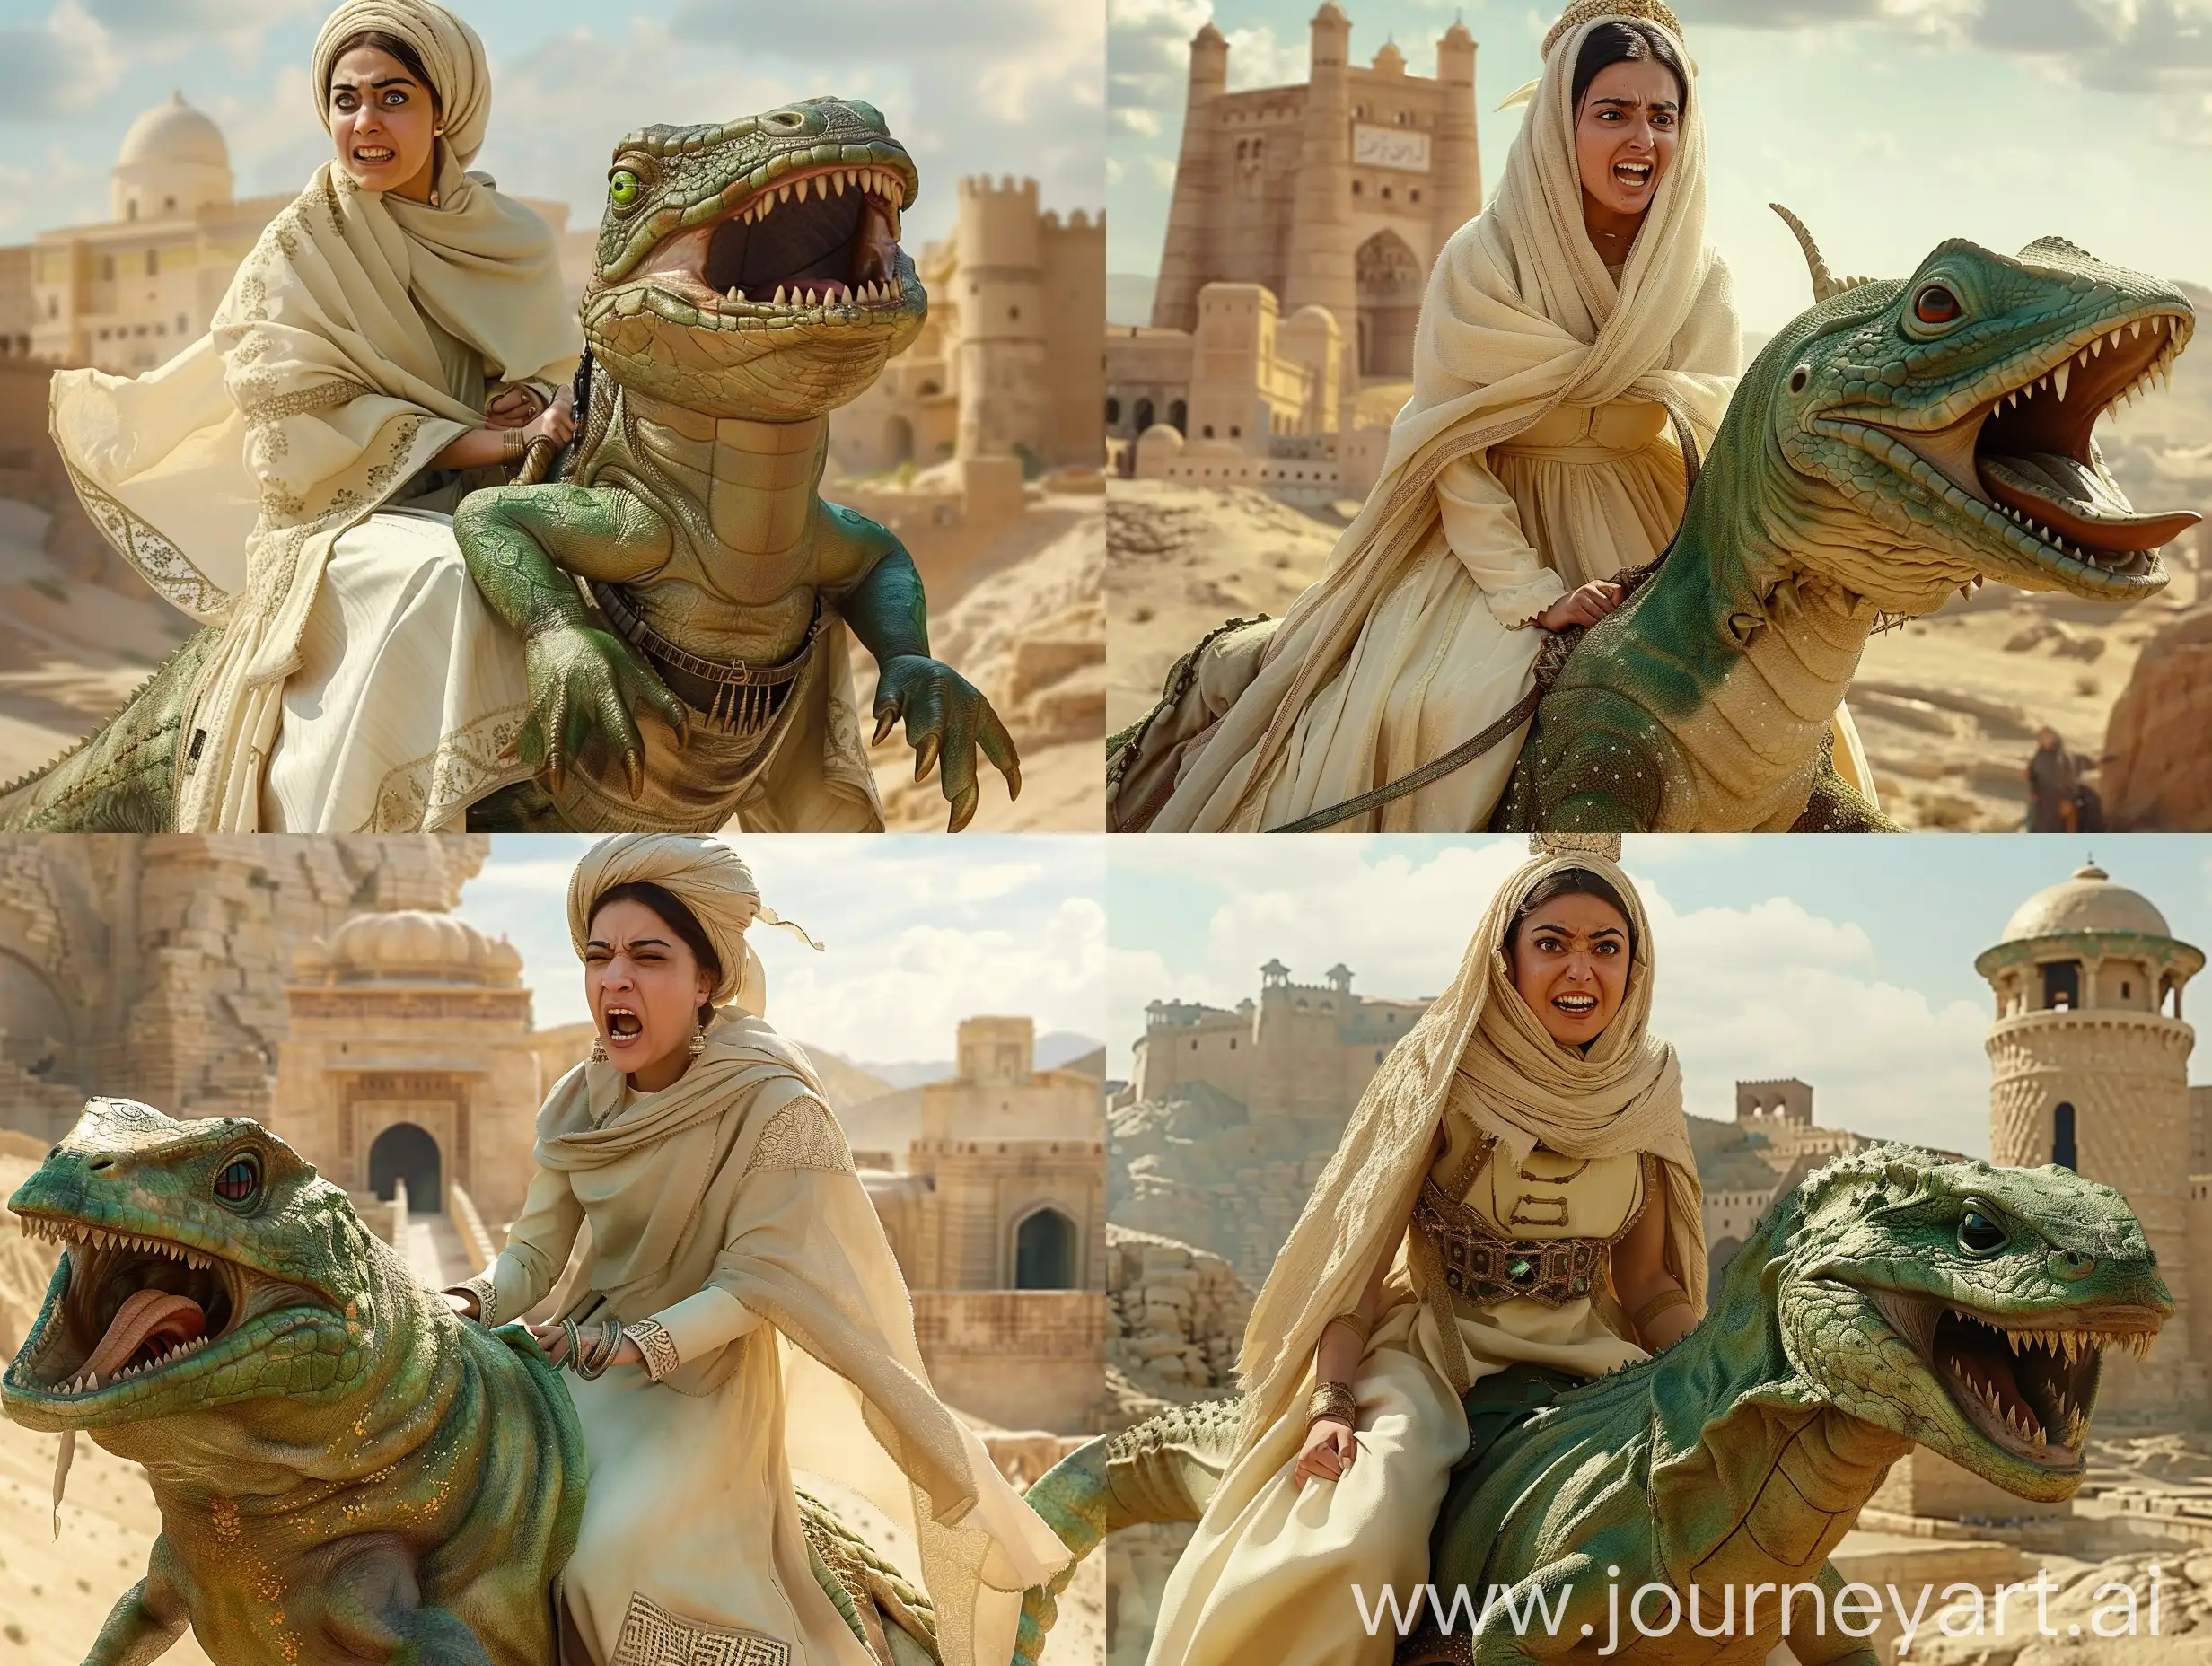 A young Persian woman wearing a cream-colored traditional dress and a cream-colored shawl on her head is frowning while riding a Lizard-like creature whose head resembles a frog, a lizard, a cat, and a silkworm, and the creature's mouth is slightly open and roaring.  and its teeth are defined and it's the size of a horse and it's green, balab is a castle standing in the citadel and both are shouting, create for me a real photo with high quality detail, with midday lighting they are in the Persian Empire, create a realistic 4K photo with fine details and daylight lighting. Monitors, create for me a real quality photo with fine details and midday sun lighting, in a desert, in an ancient civilization, cinematic, epic realism,8K, highly detailed, medium shot, upper body, glamour lighting, natural lighting, backlit 